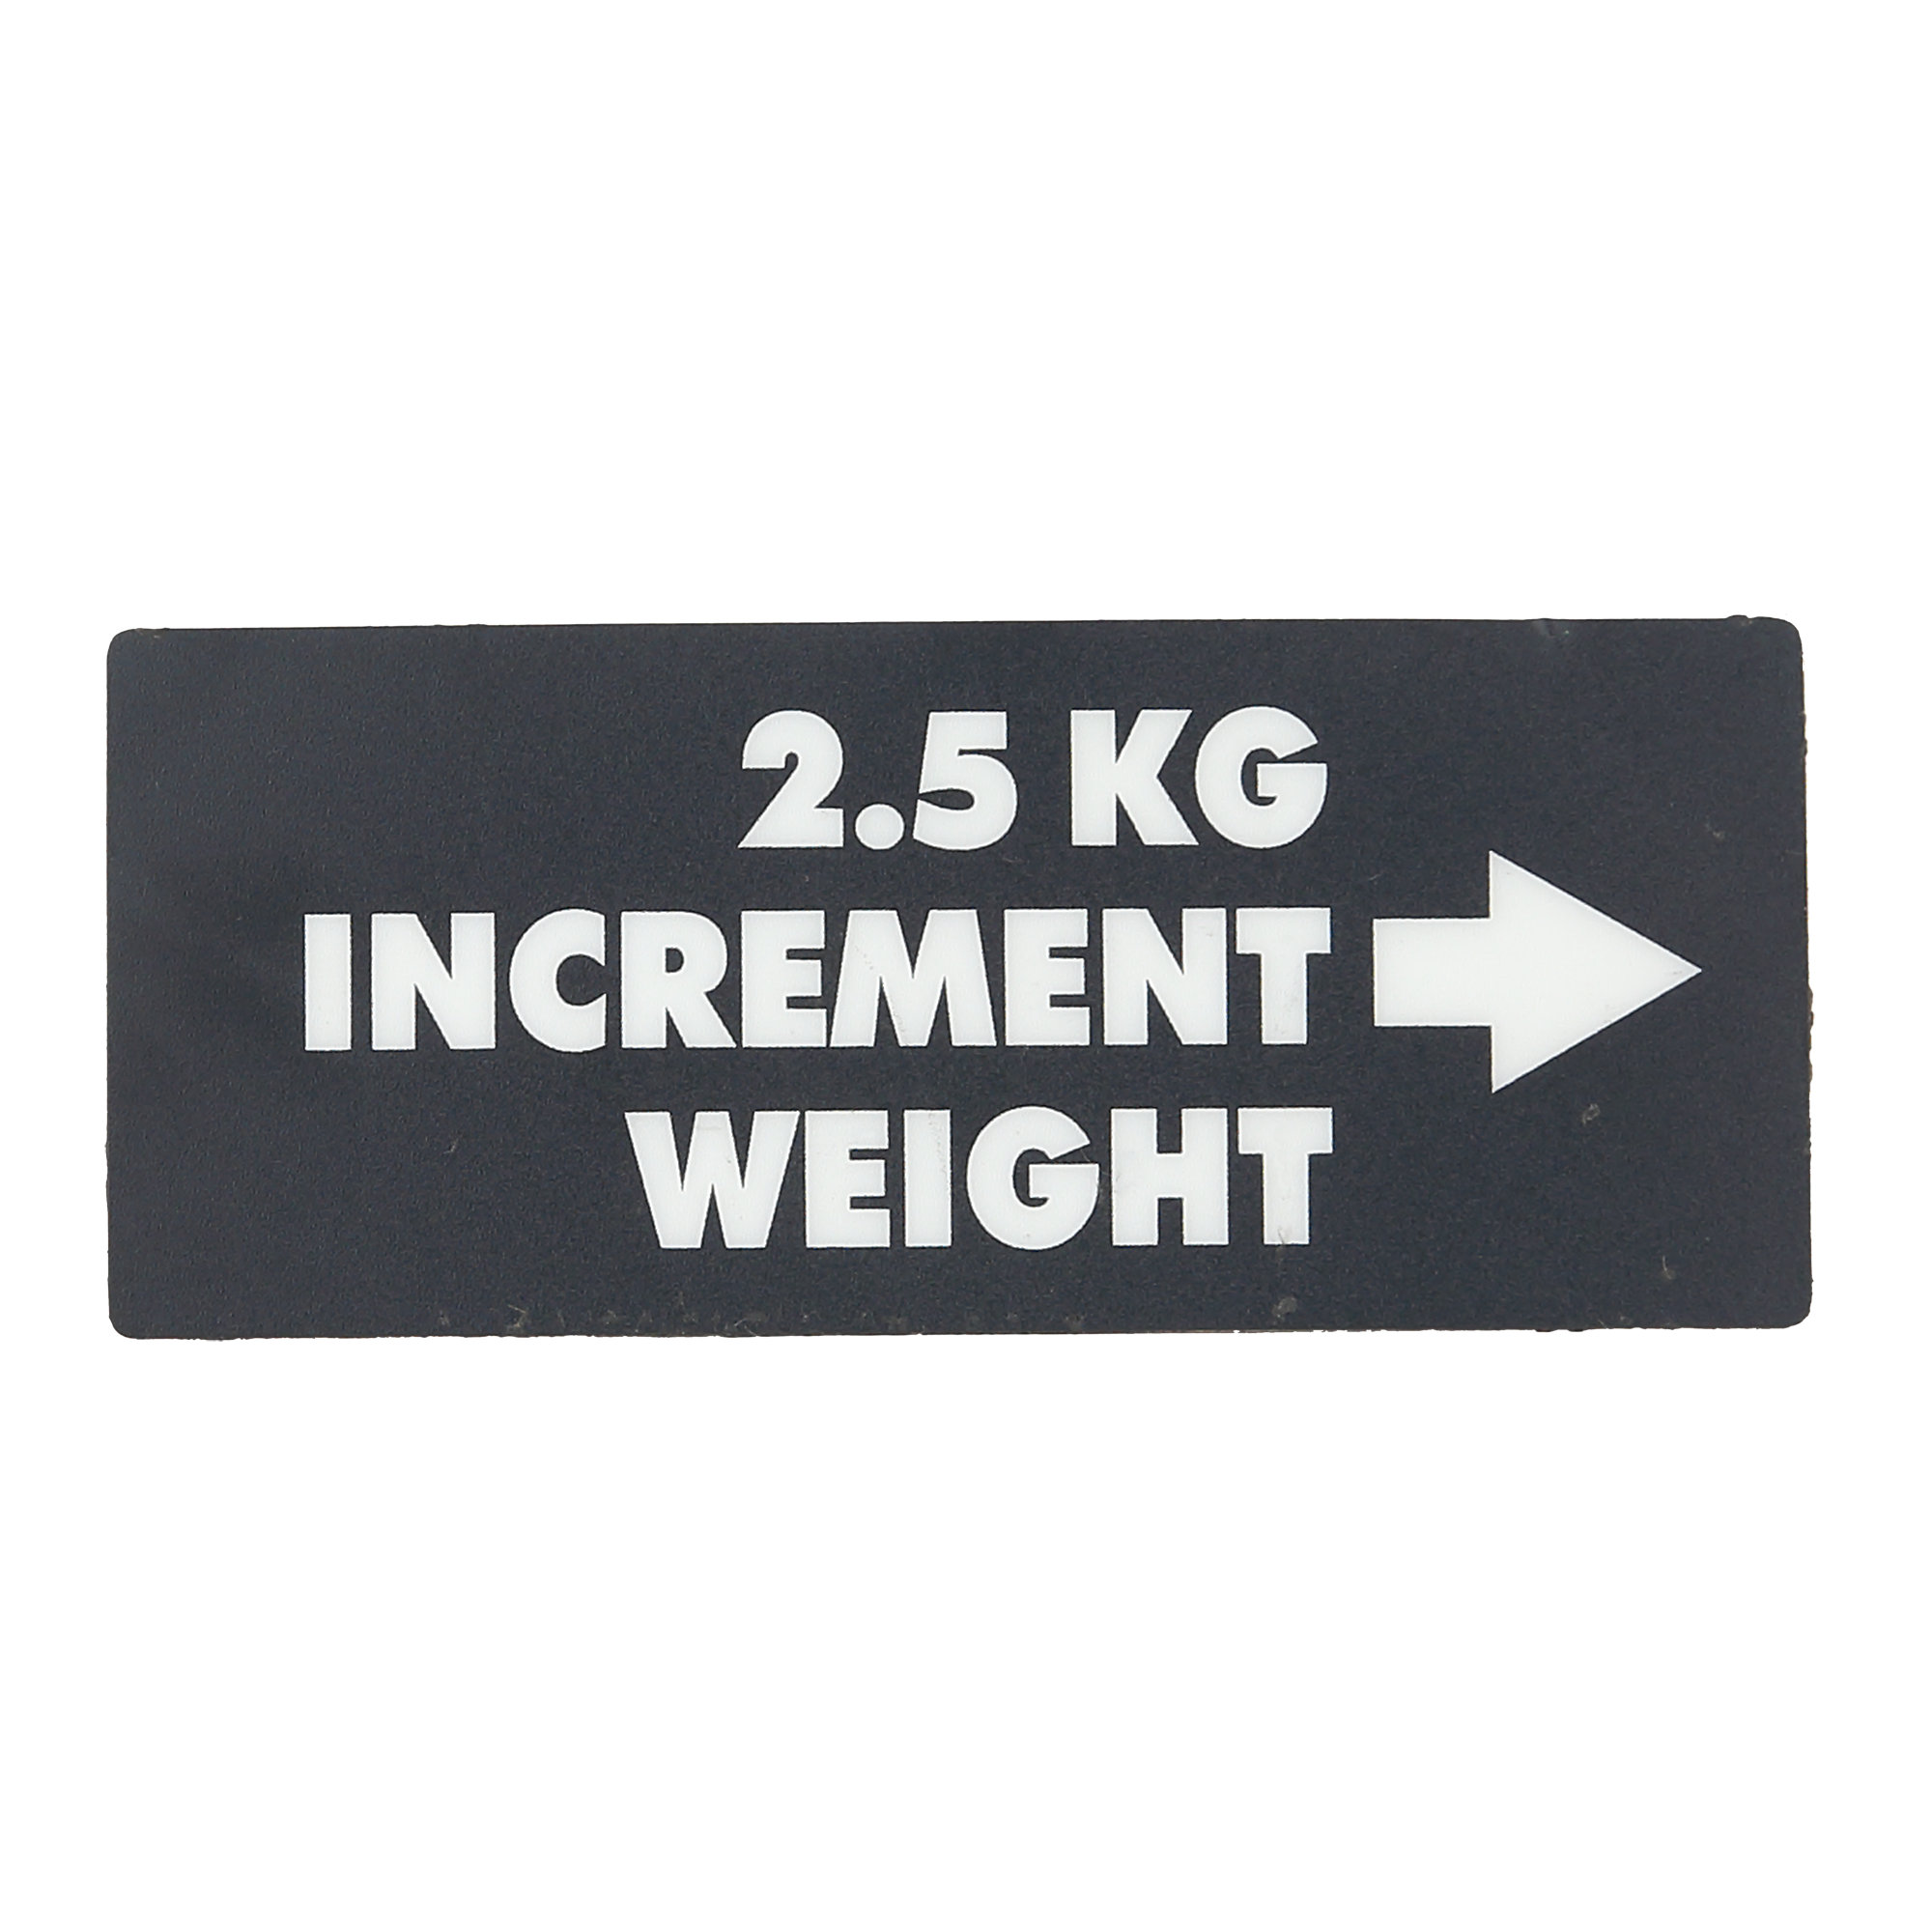 Increment Weight Decal, KG (RT)